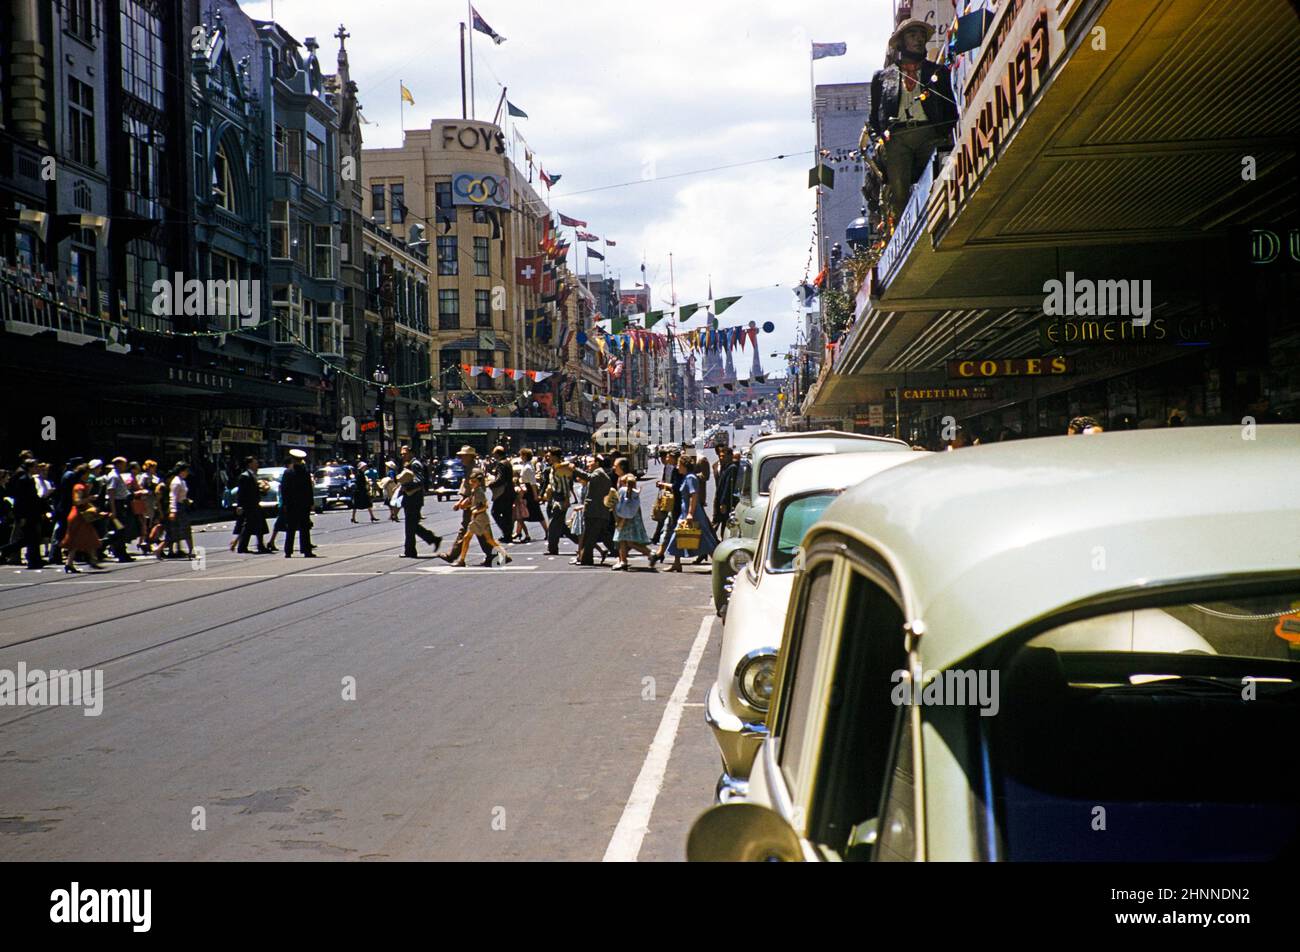 Shops and crowds of shoppers in city centre, Elizabeth Street, Melbourne, Victoria, Australia 1956 - Coles and Foys department stores Stock Photo